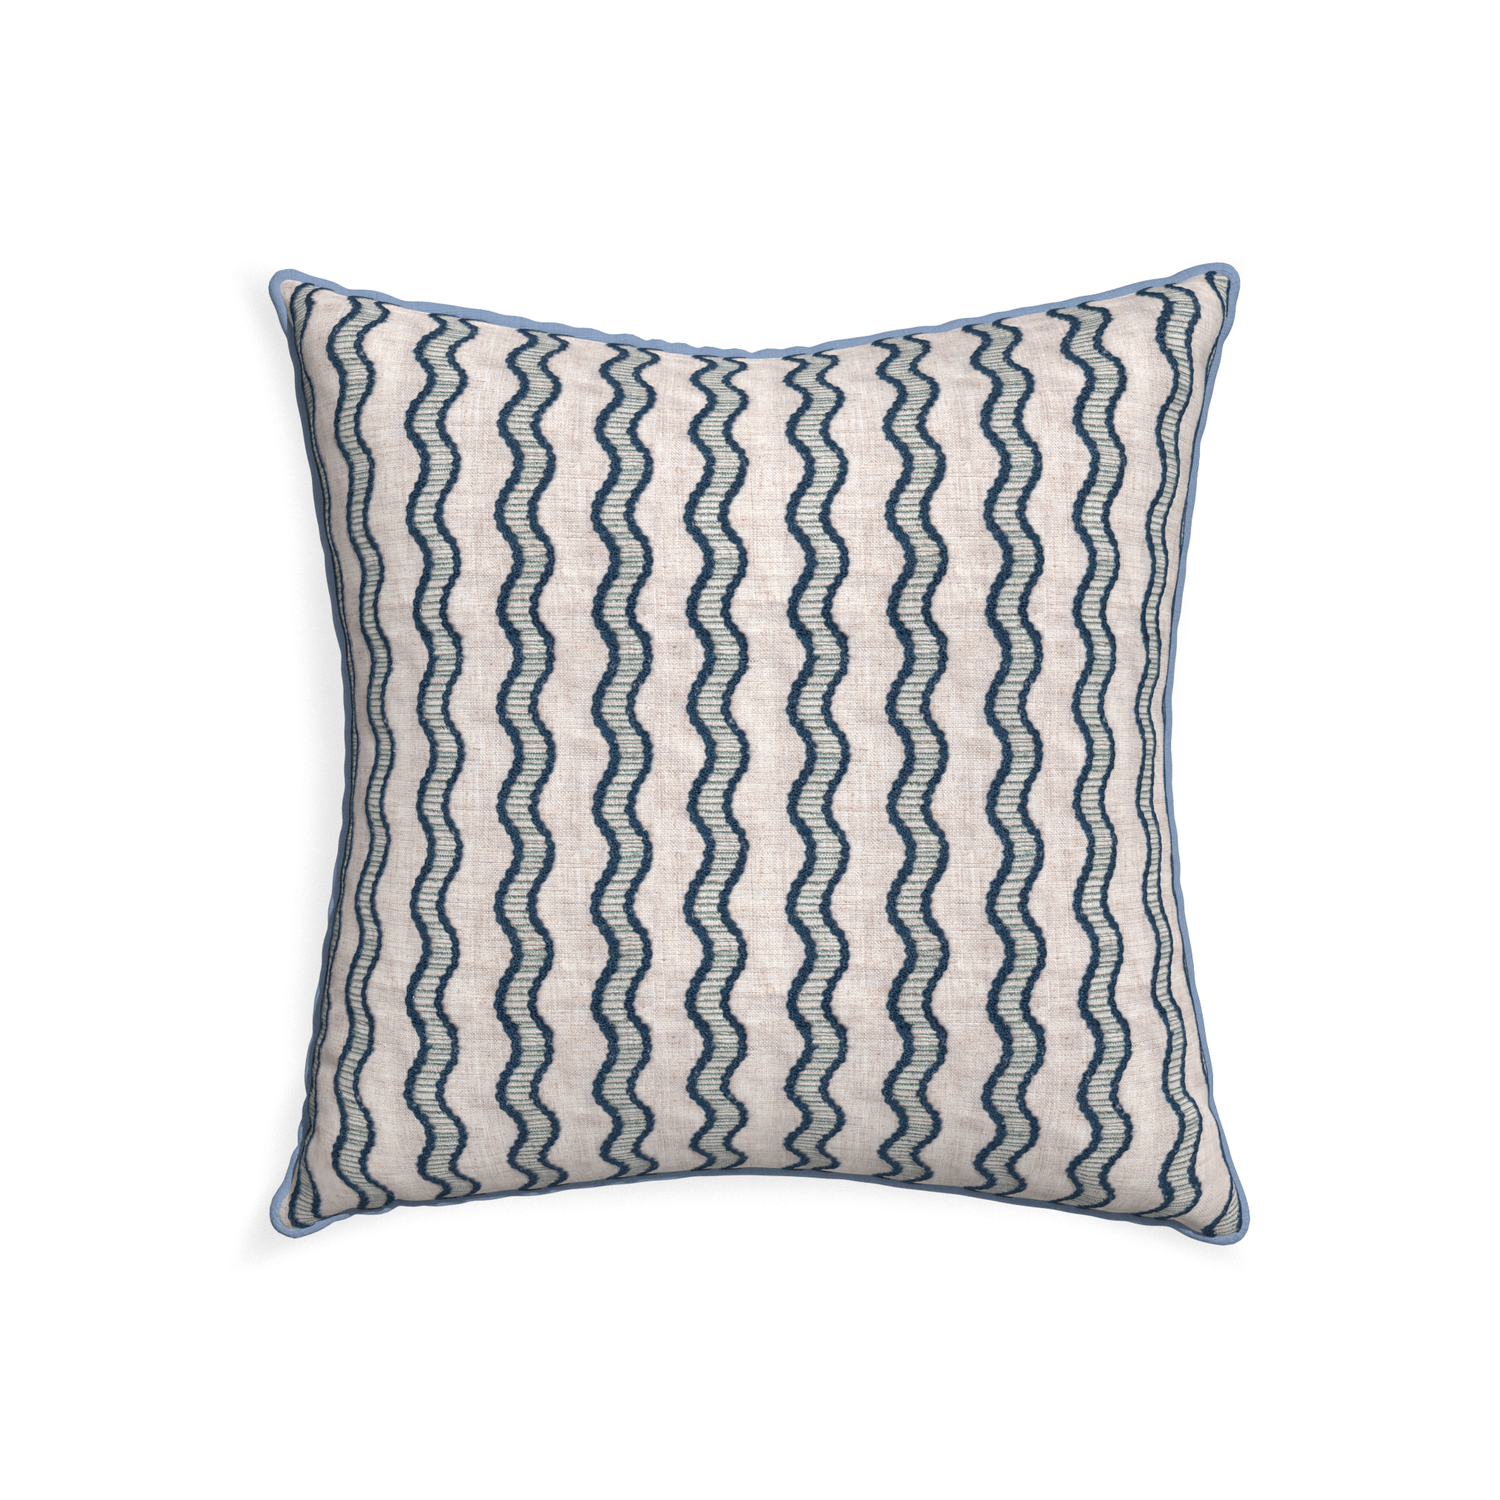 22-square beatrice custom embroidered wavepillow with sky piping on white background